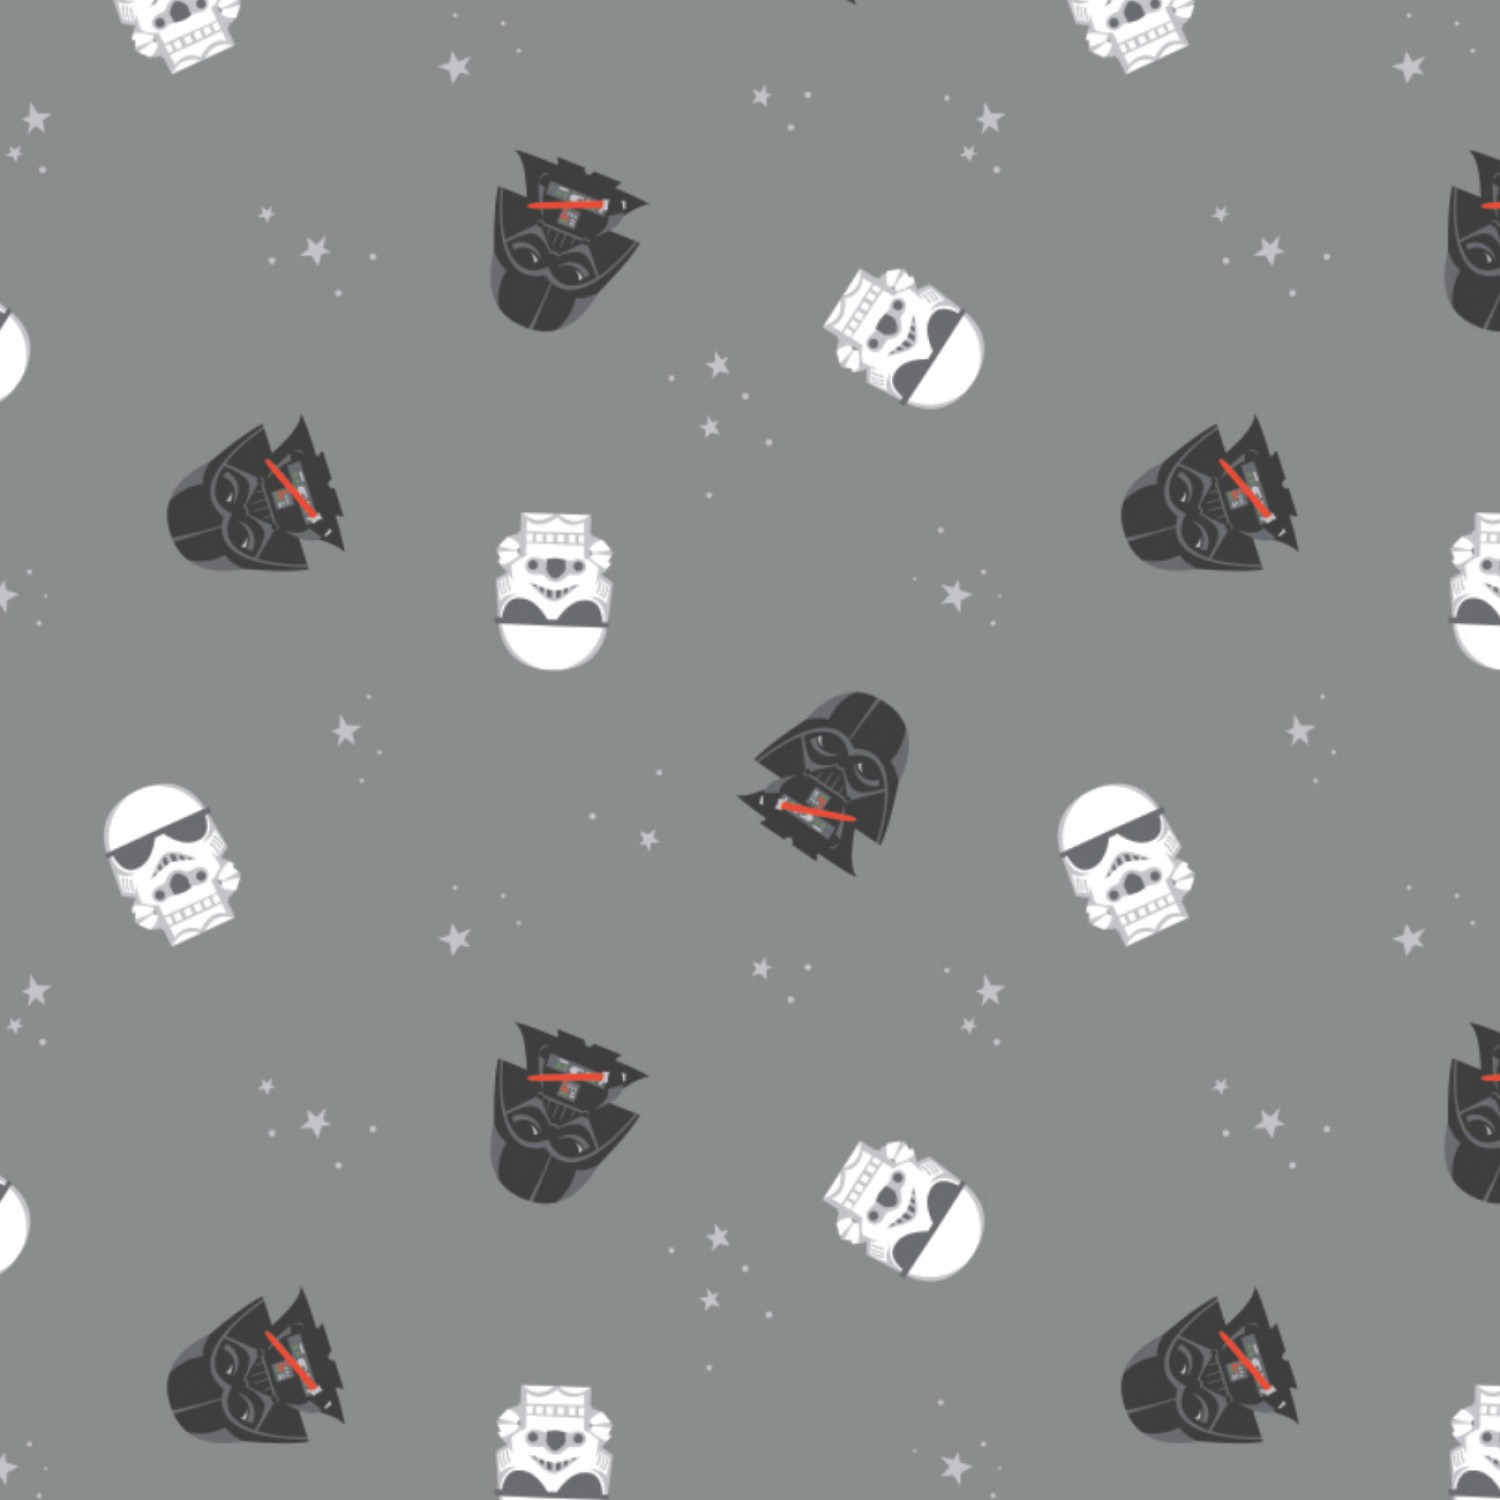 FLANNEL - Star Wars Darth Vader and Storm Trooper Fabric - Grey